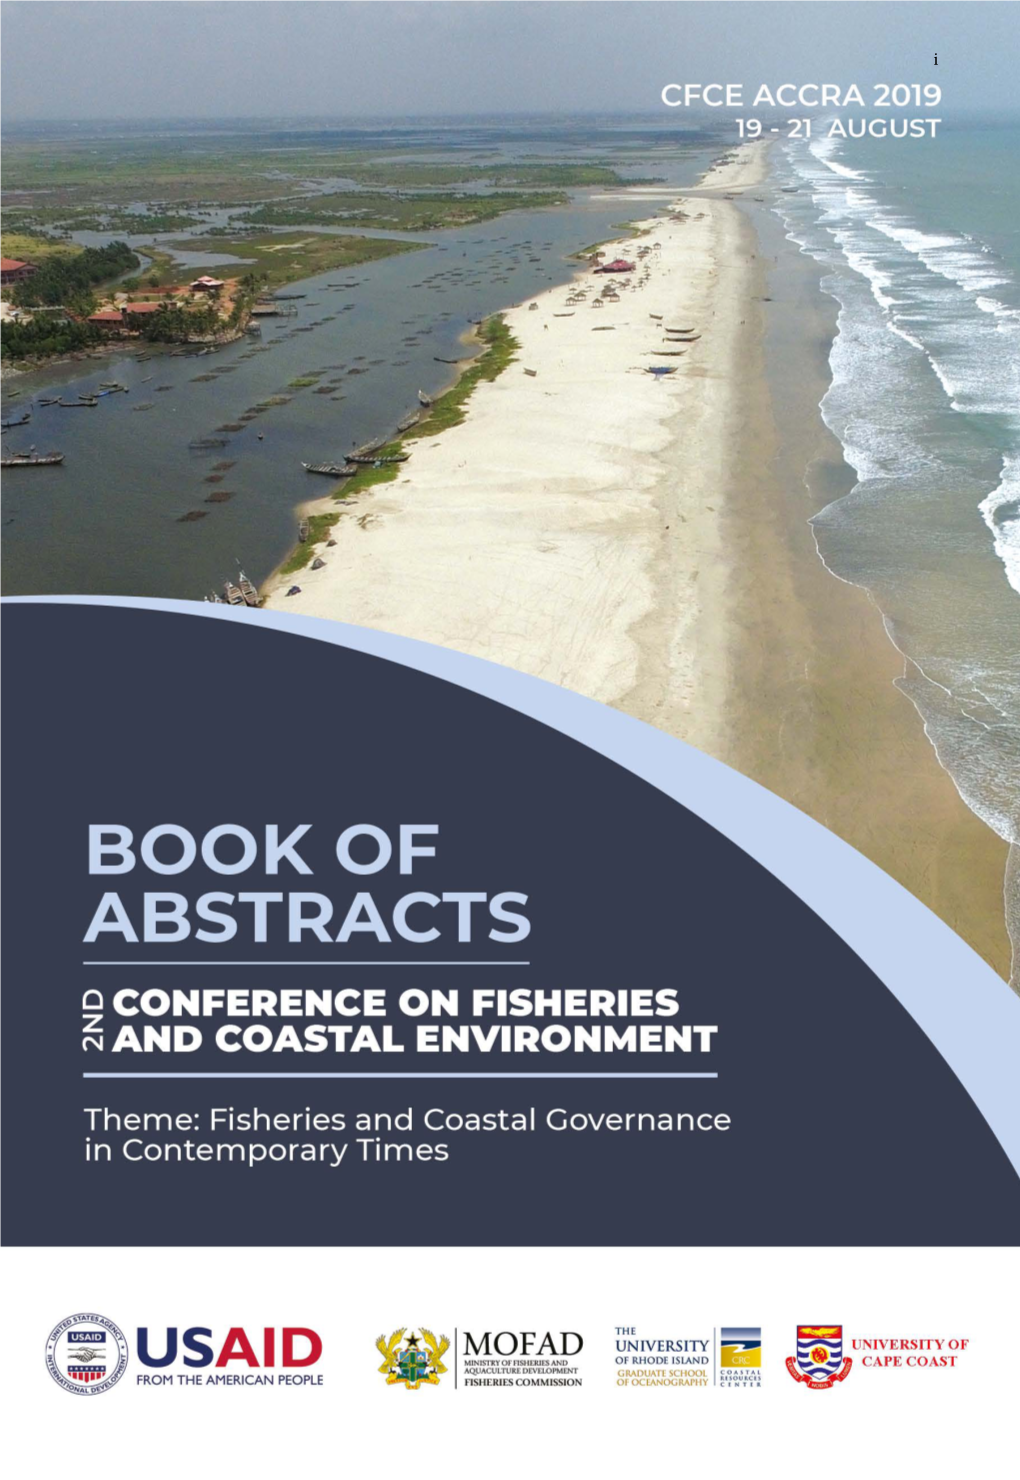 Conference on Fisheries and Coastal Environment, Accra, 2019, Book Of